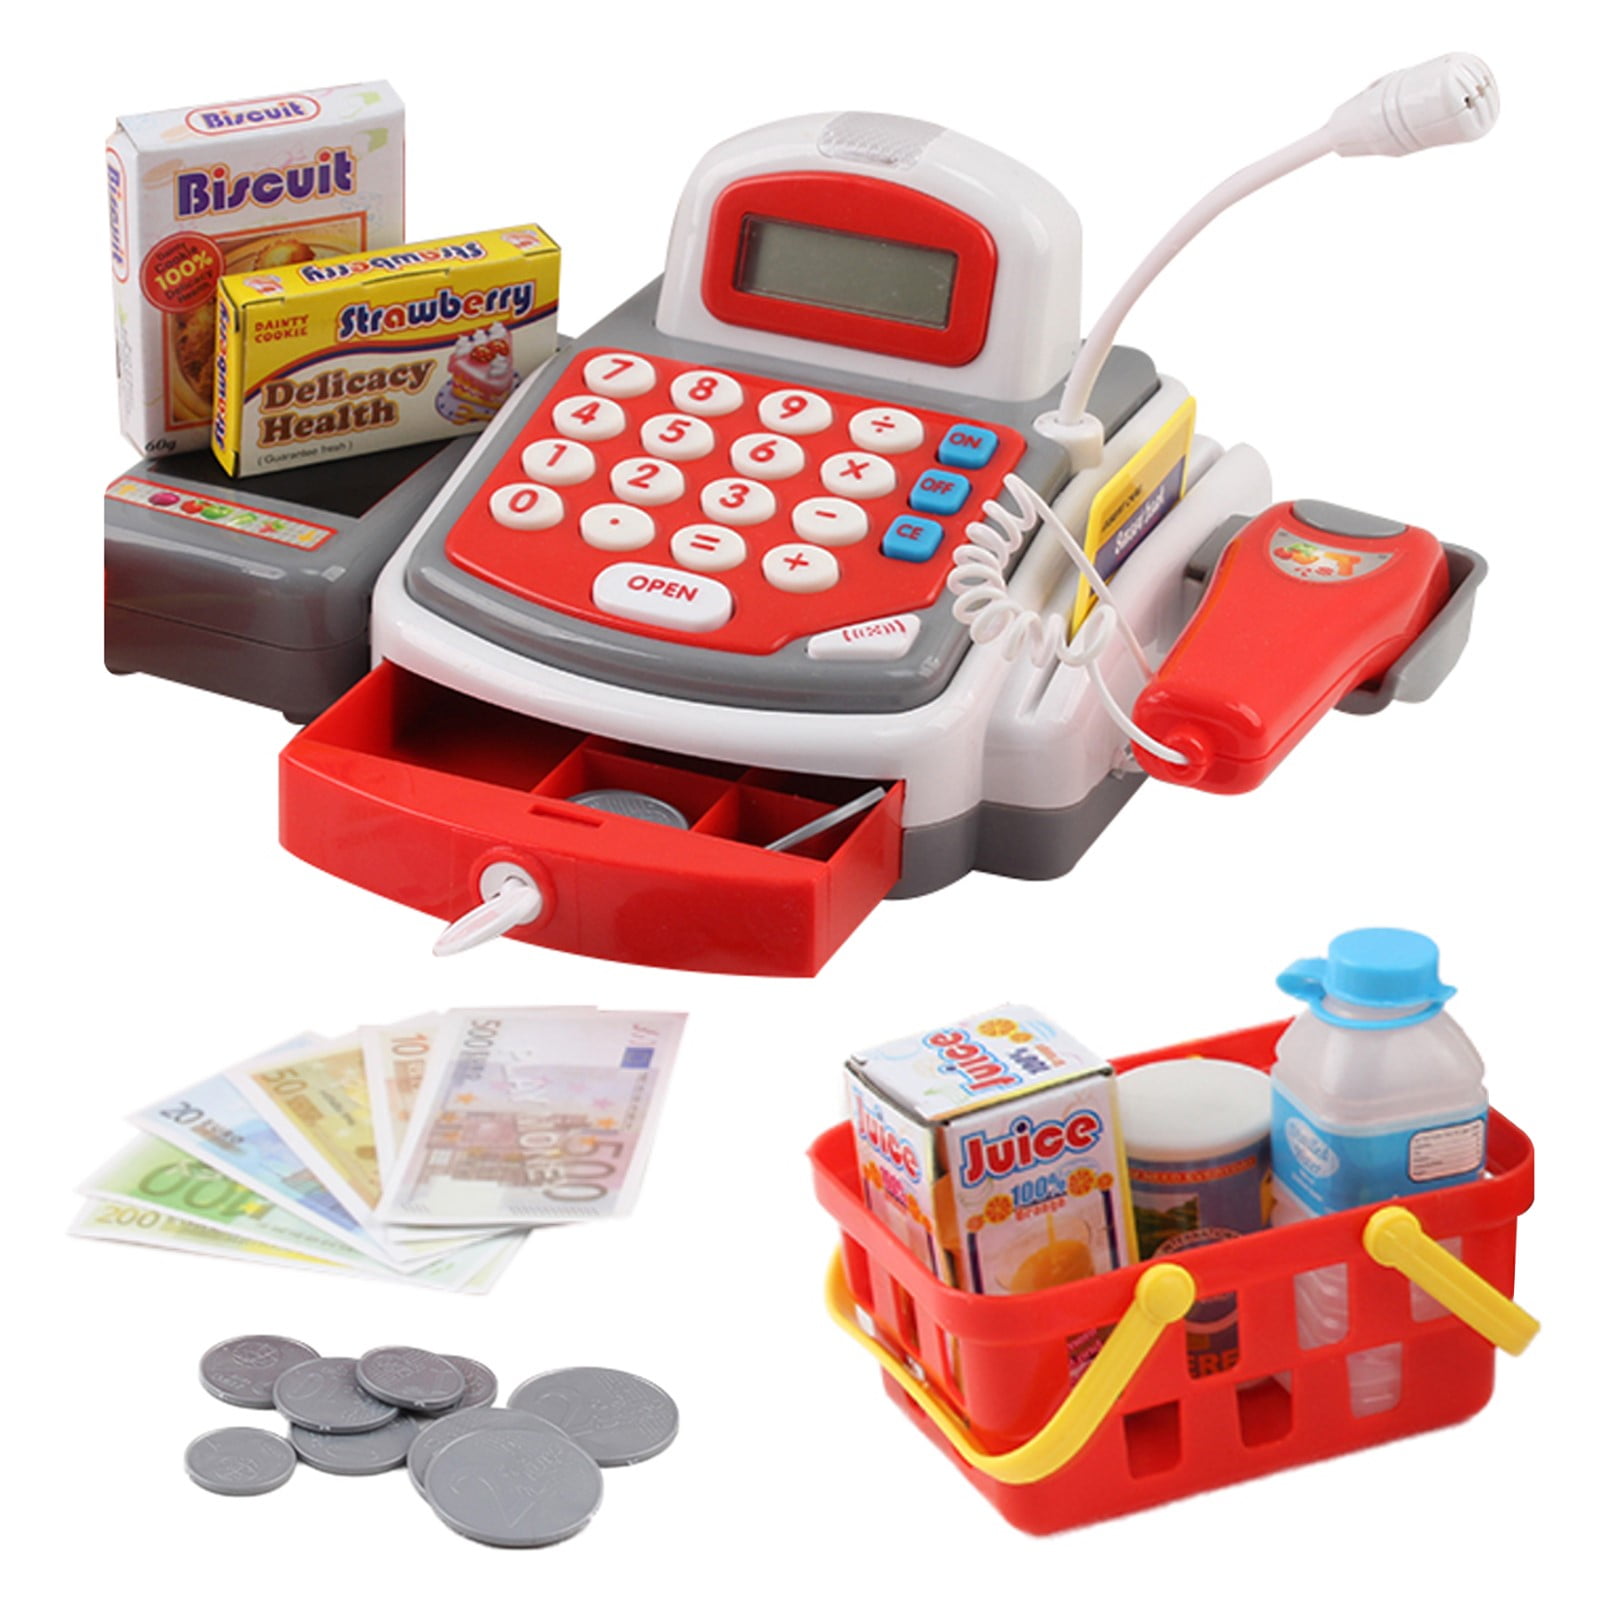 Kids Sweet Store w/ Cash Register and Candies Pretend Play Toy Birthday Gift 